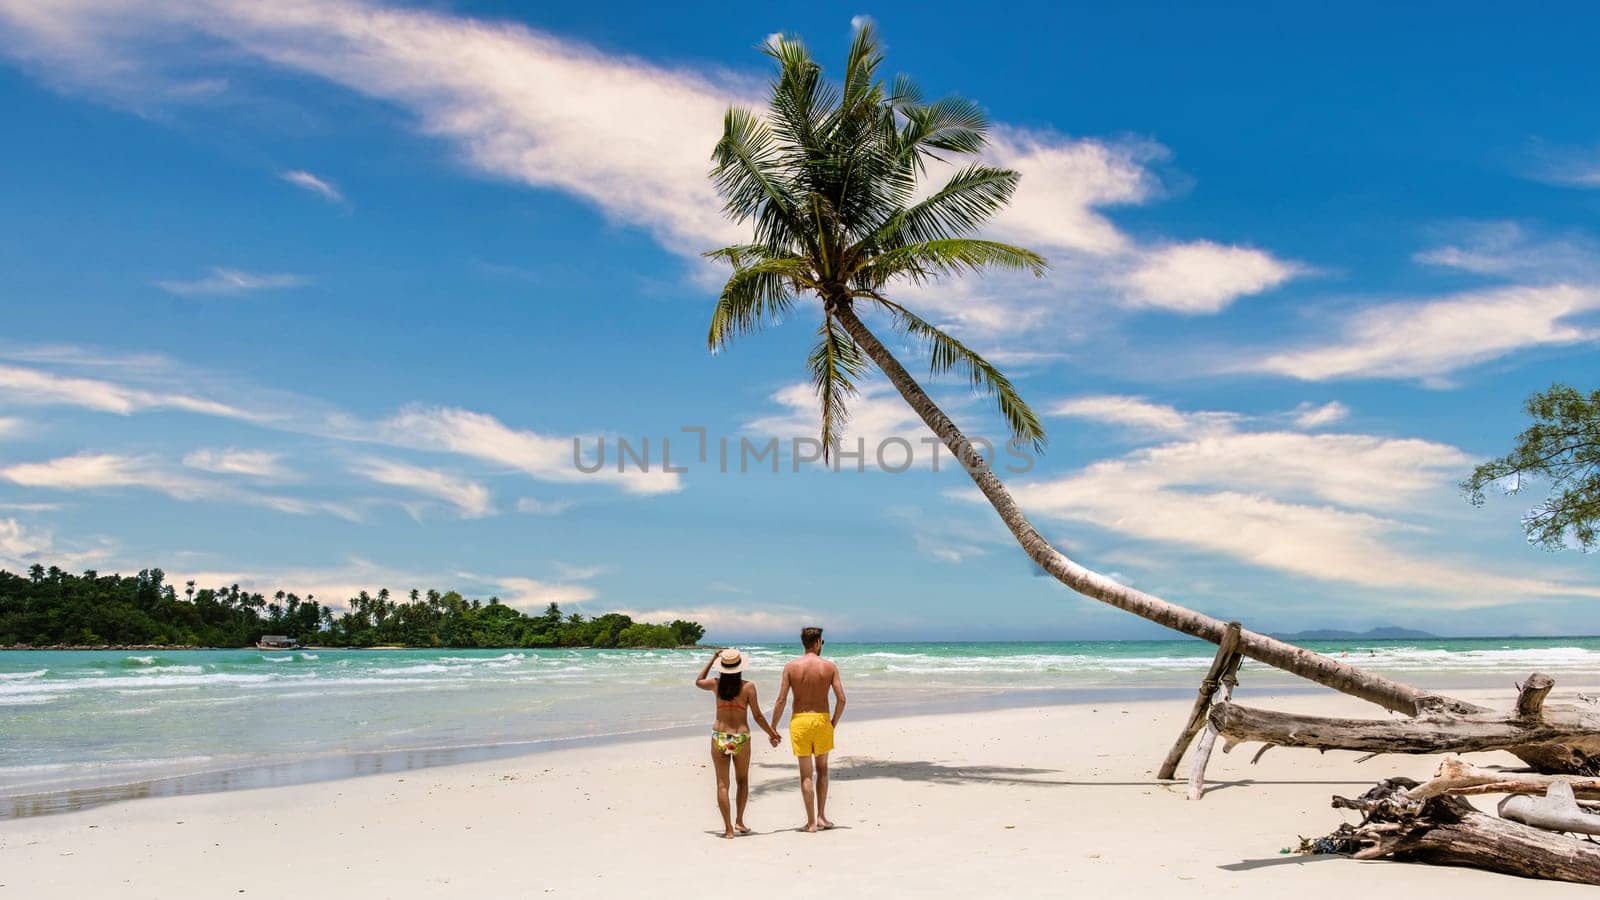 A couple is enjoying a moment on a sandy beach under a palm tree, with the sound of crashing waves in the background. The sky is clear with fluffy clouds, natural landscape in Koh Kood Thailand